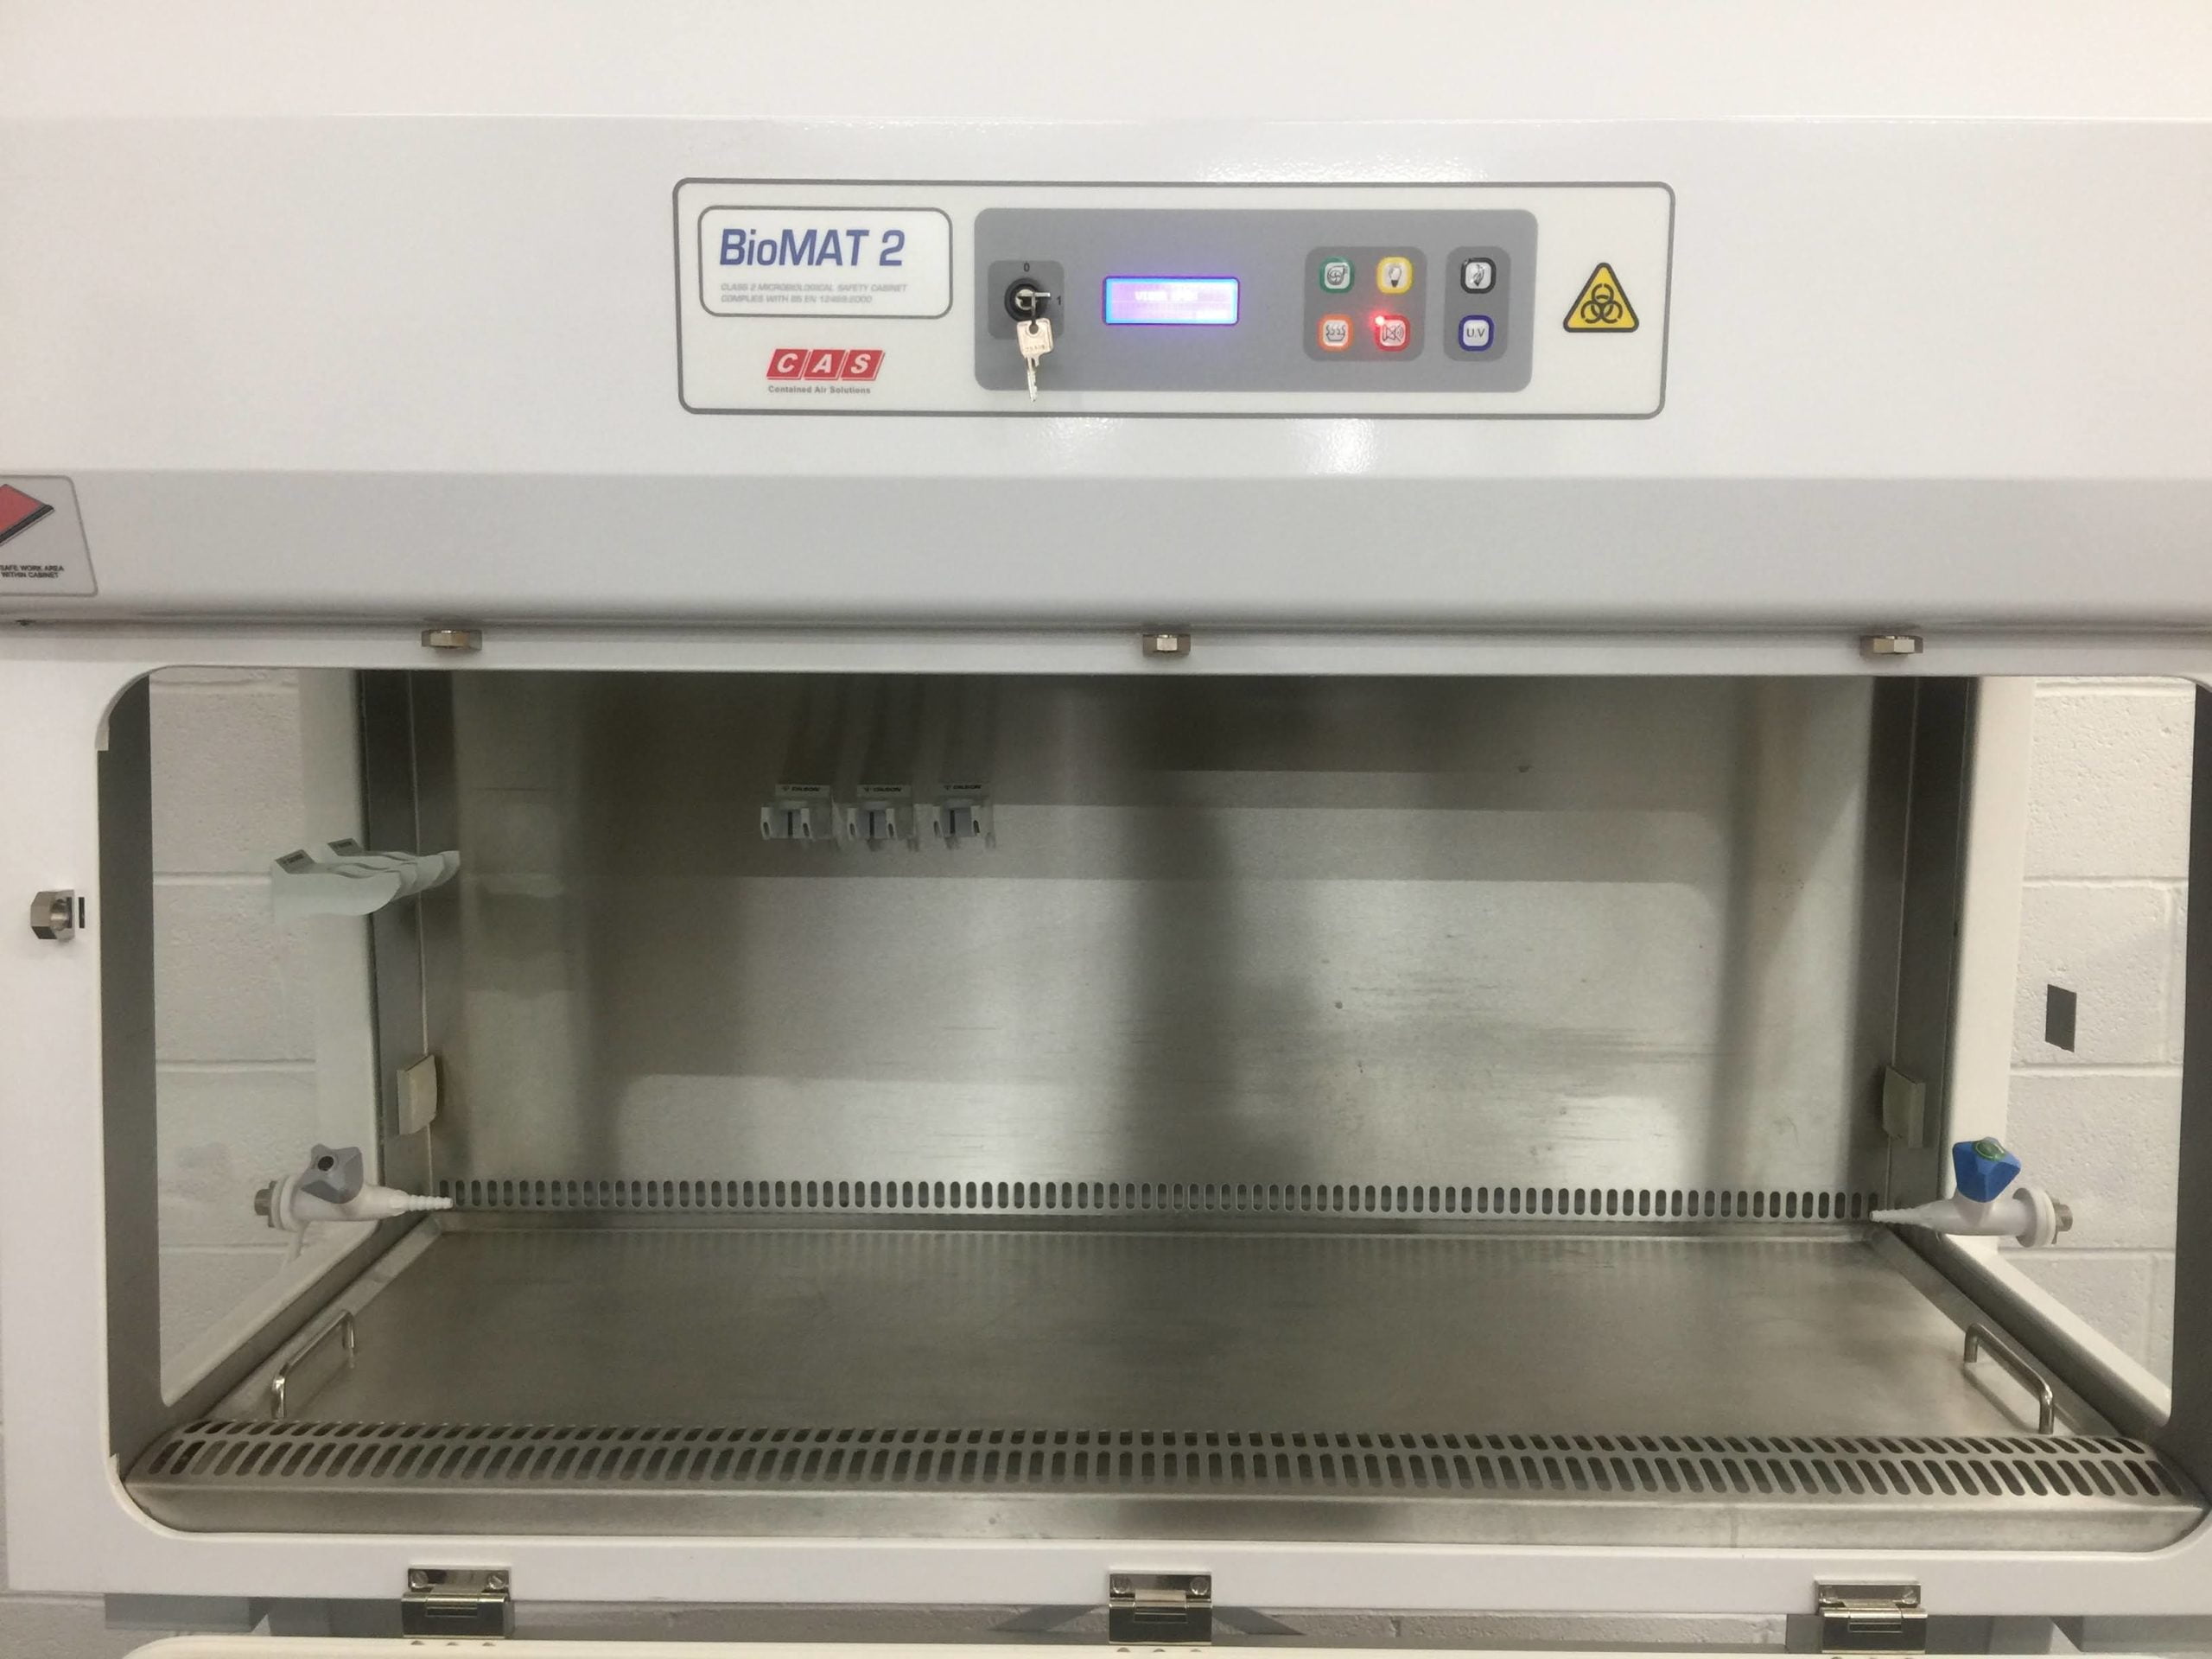 contained air solutions biomat 2 class 2 microbiological safety cabinet